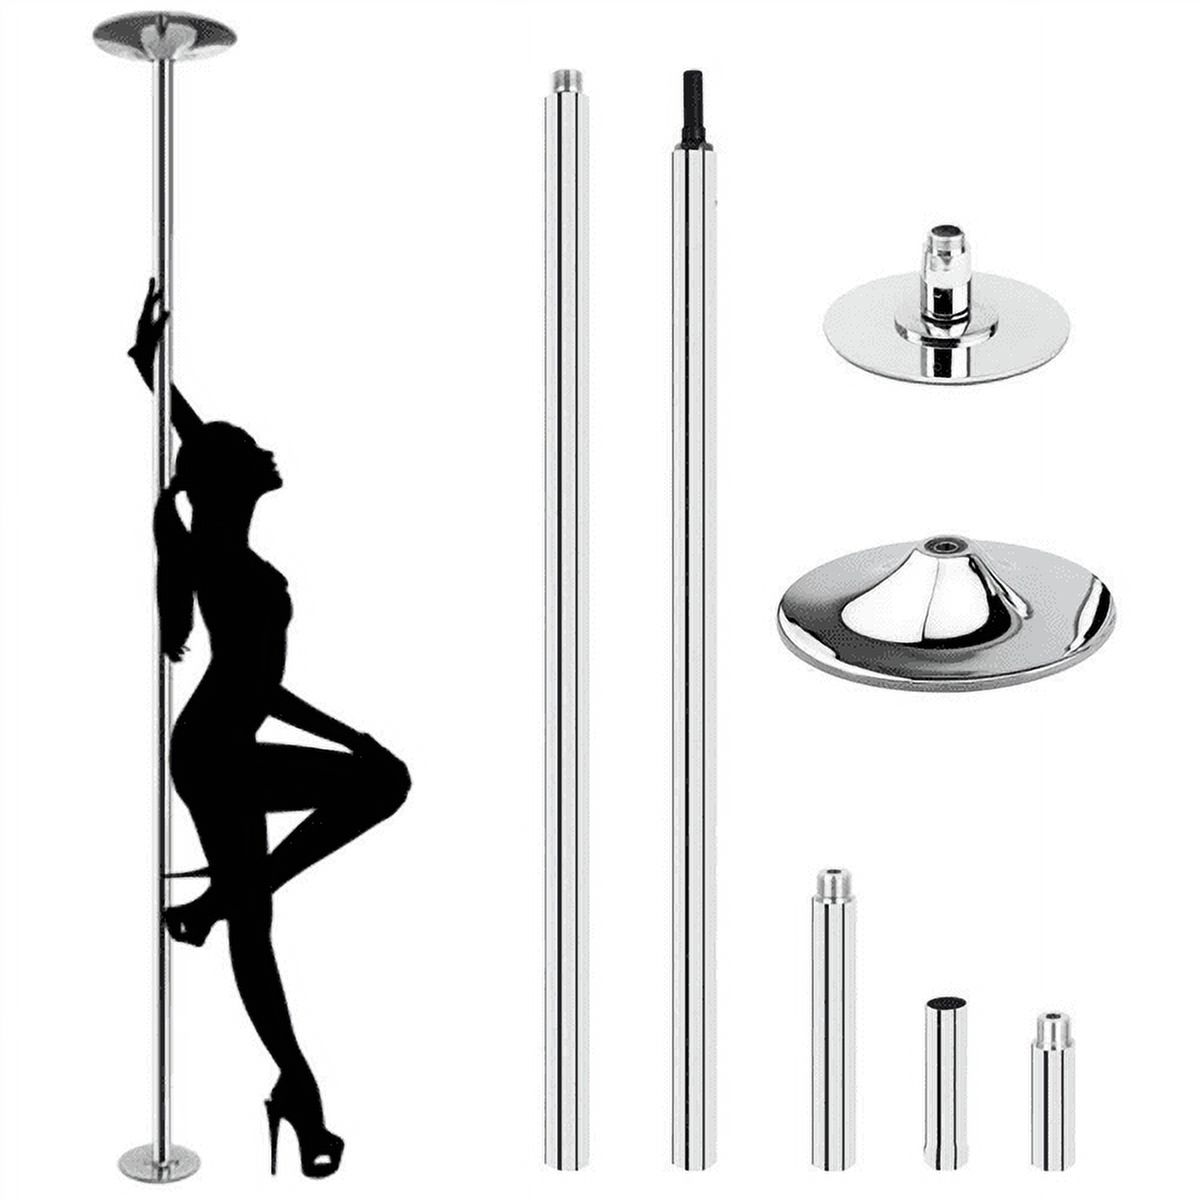 Portable Dance Pole Static Spinning Exercise Fitness Silver - image 1 of 10